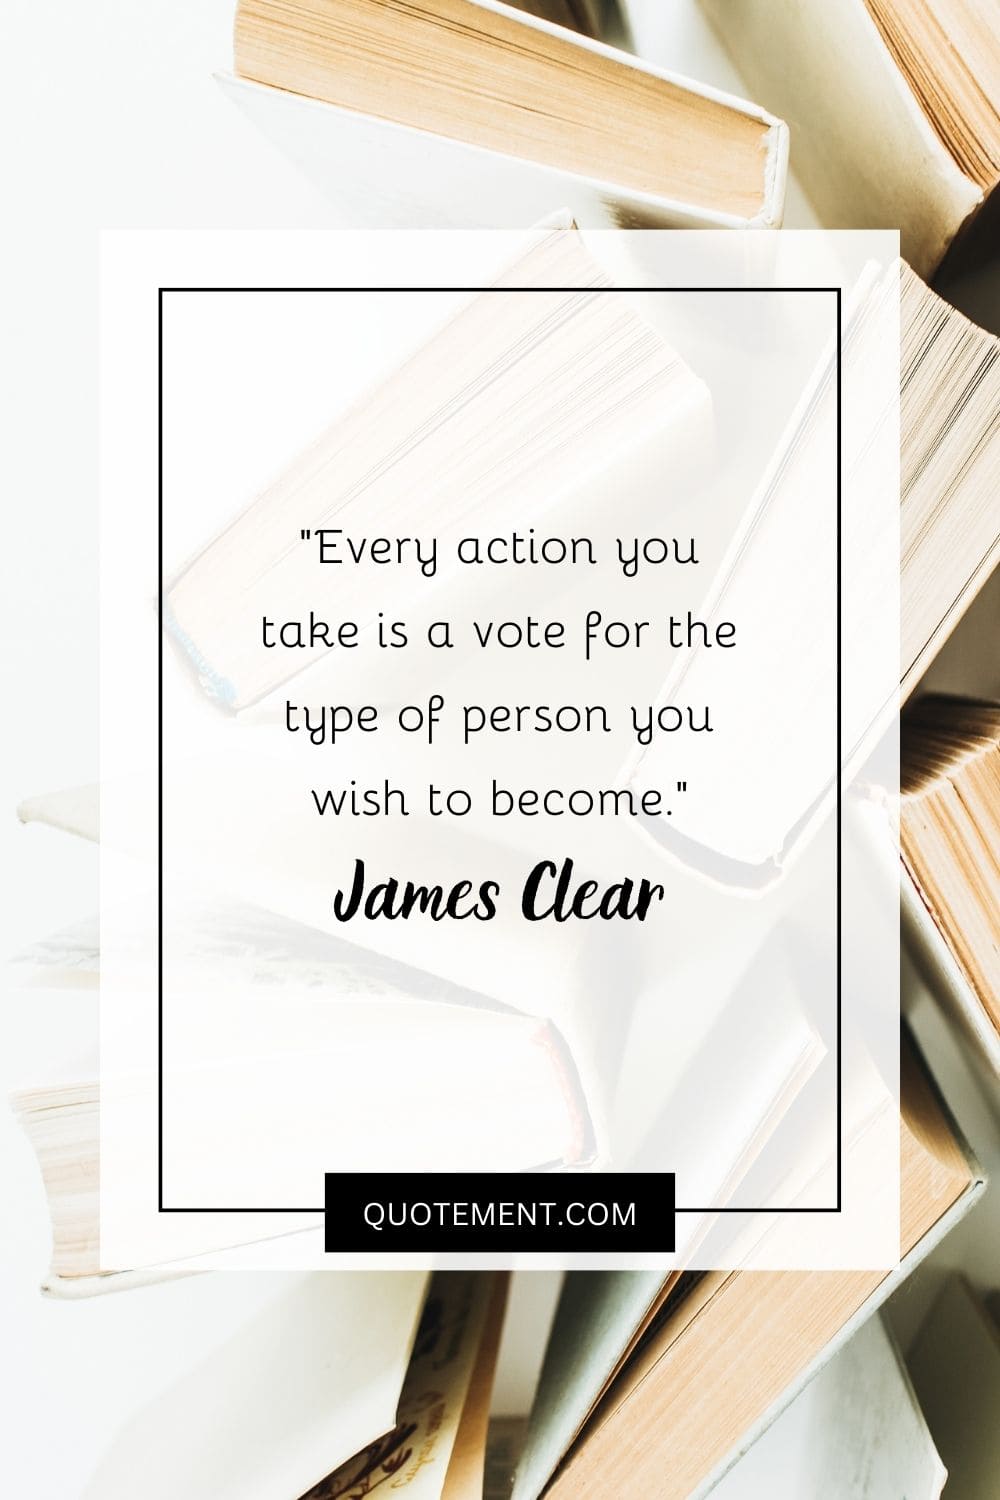 Every action you take is a vote for the type of person you wish to become